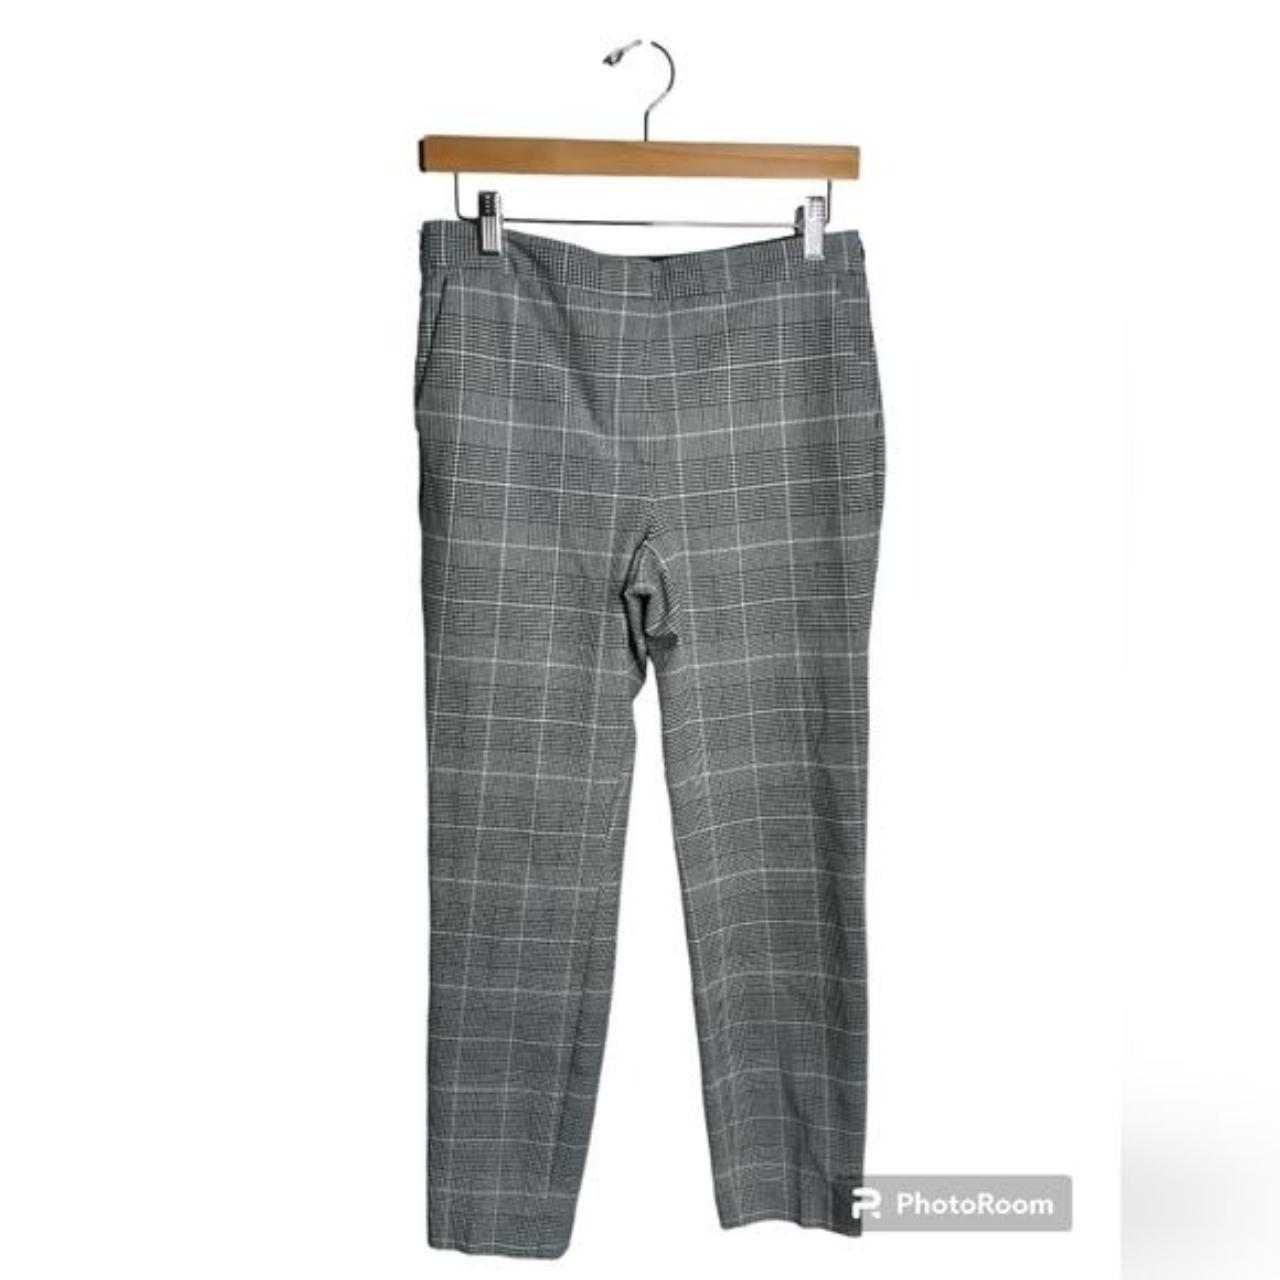 ZARA Grey Checked Plaid High Waisted Skinny Kick Flare Ankle Lenghth  Trousers 8 | eBay